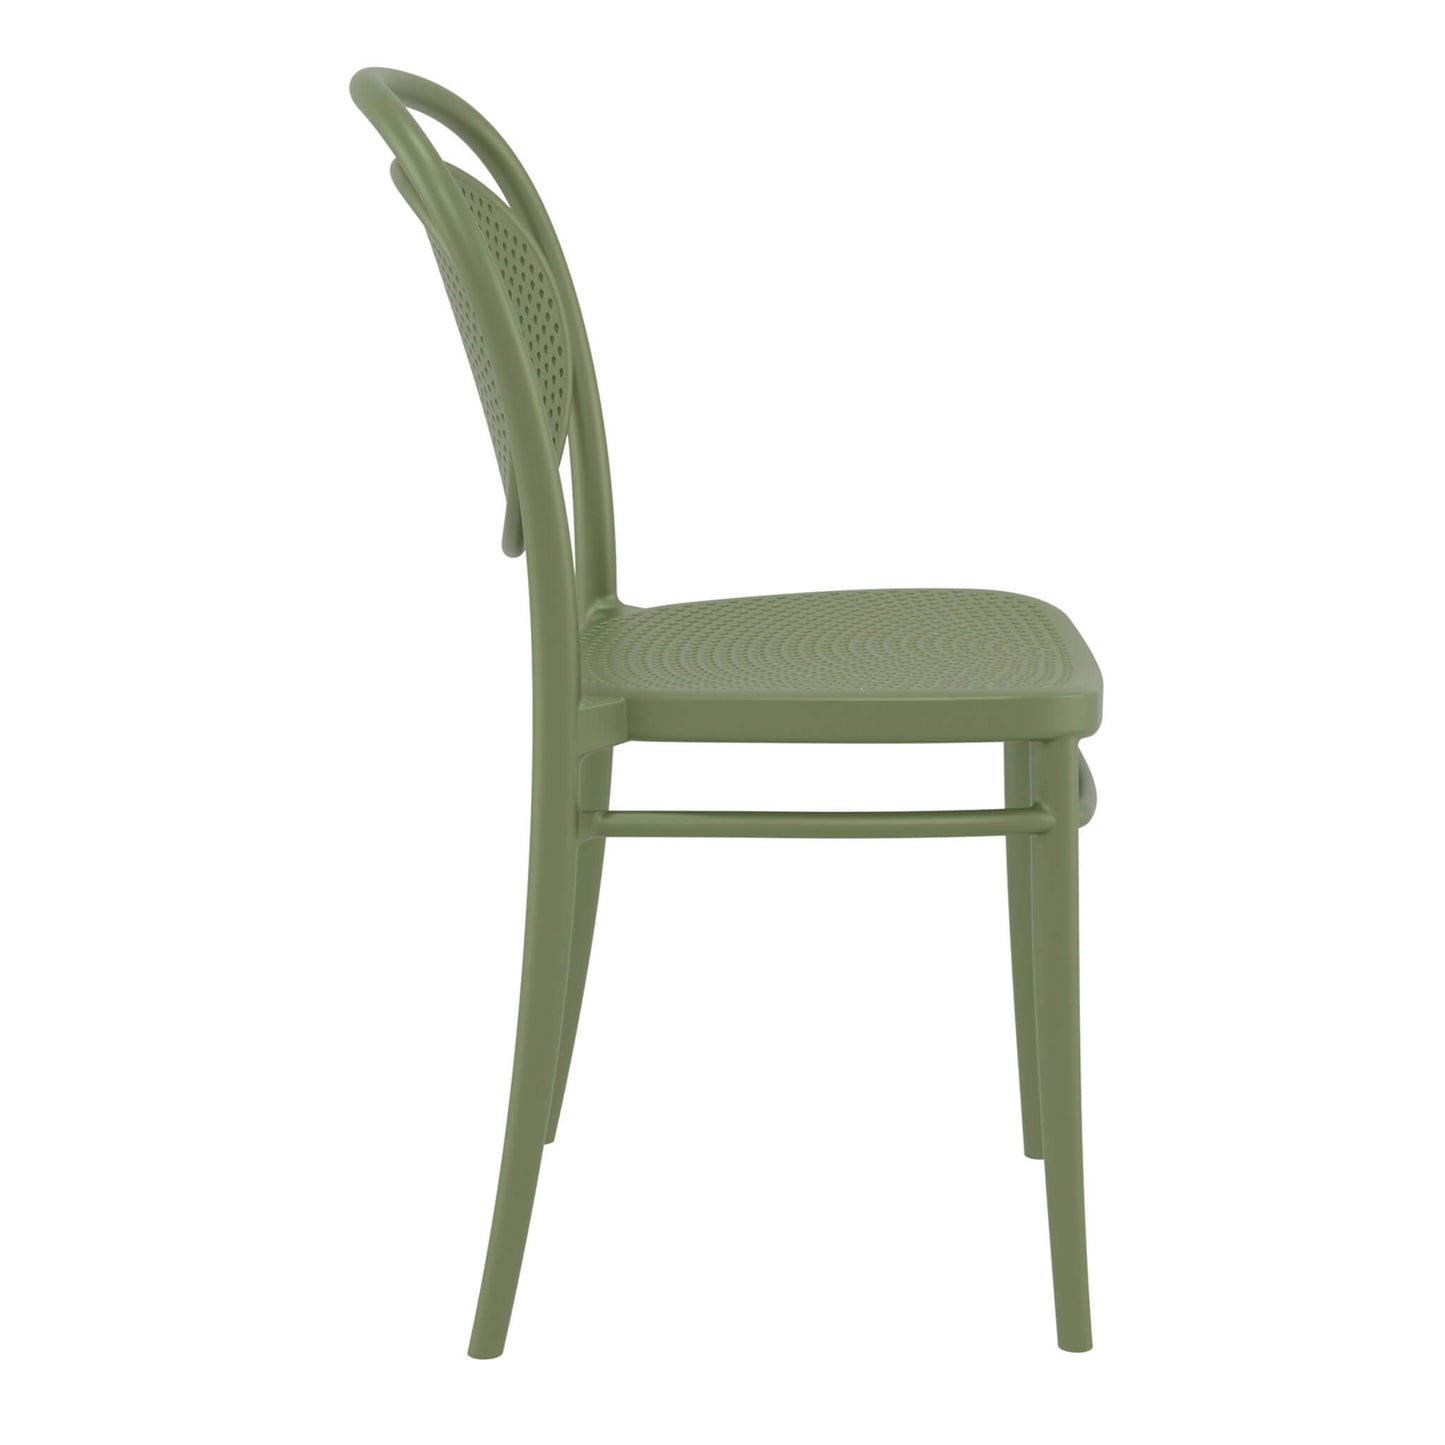 Regan | Plastic Stackable Outdoor Dining Chairs | Set Of 2 | Olive Green